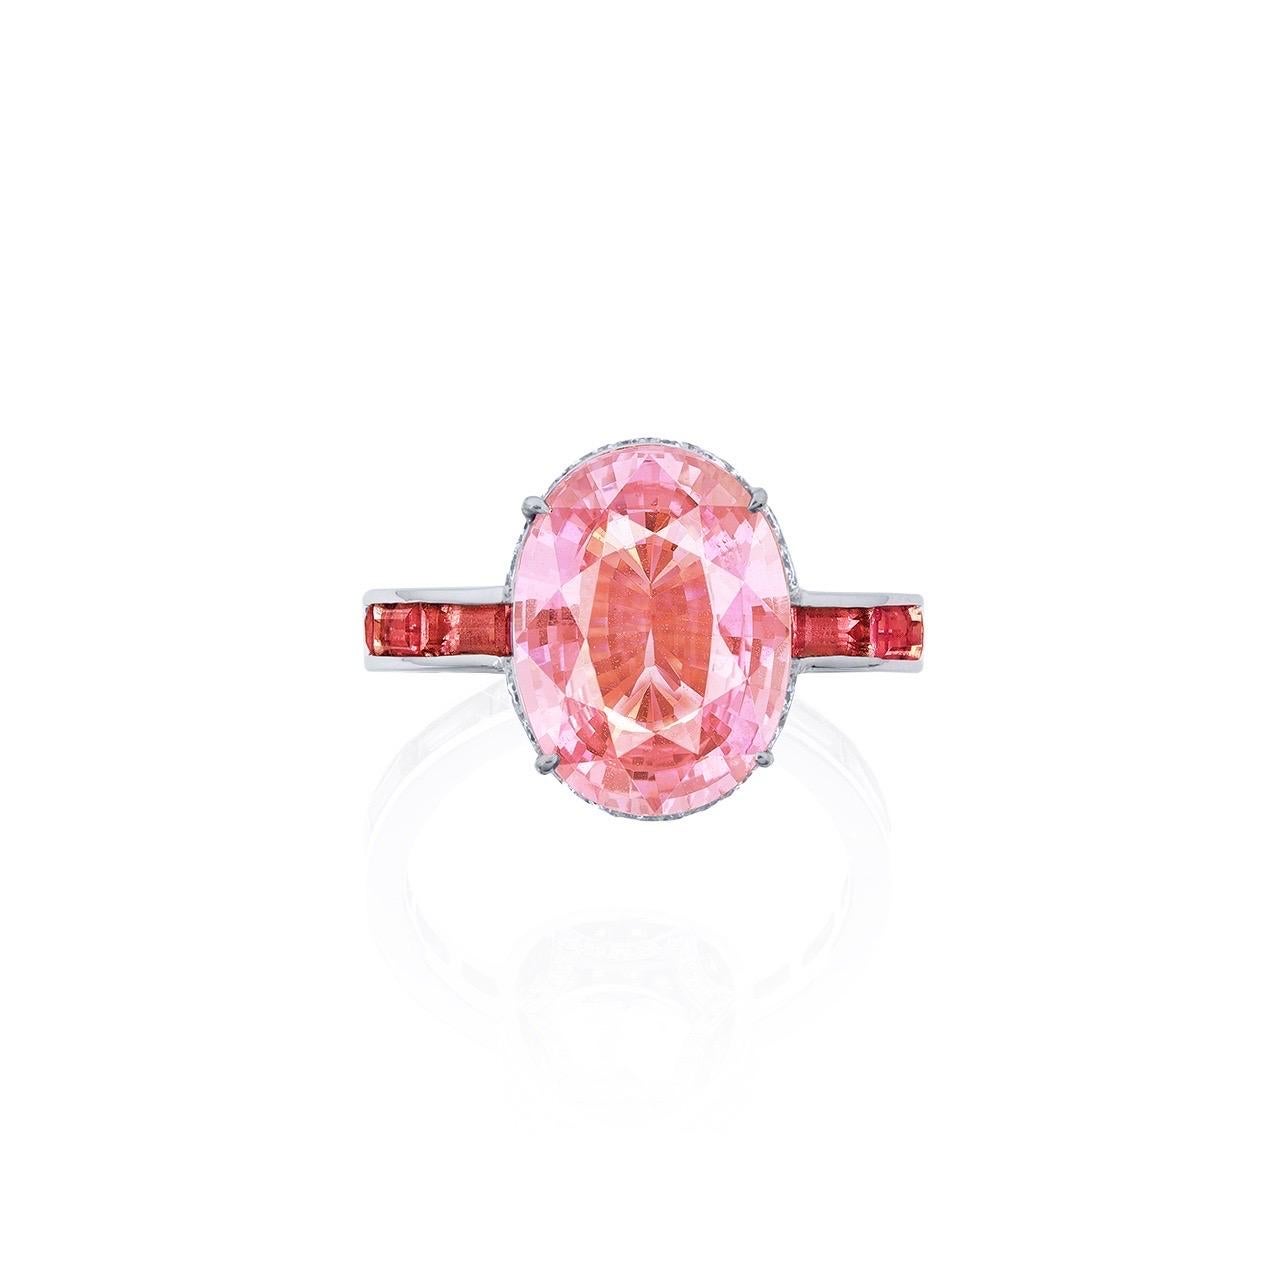 Main stone: 5.38 carat Orangy-Pink, Oval
Lot information
Setting: 14 Malayan color-change garnets totaling approximately 1.974 carats, 86 white diamonds totaling approximately 0.83 carats

From Emilio Jewelry, a well known and respected